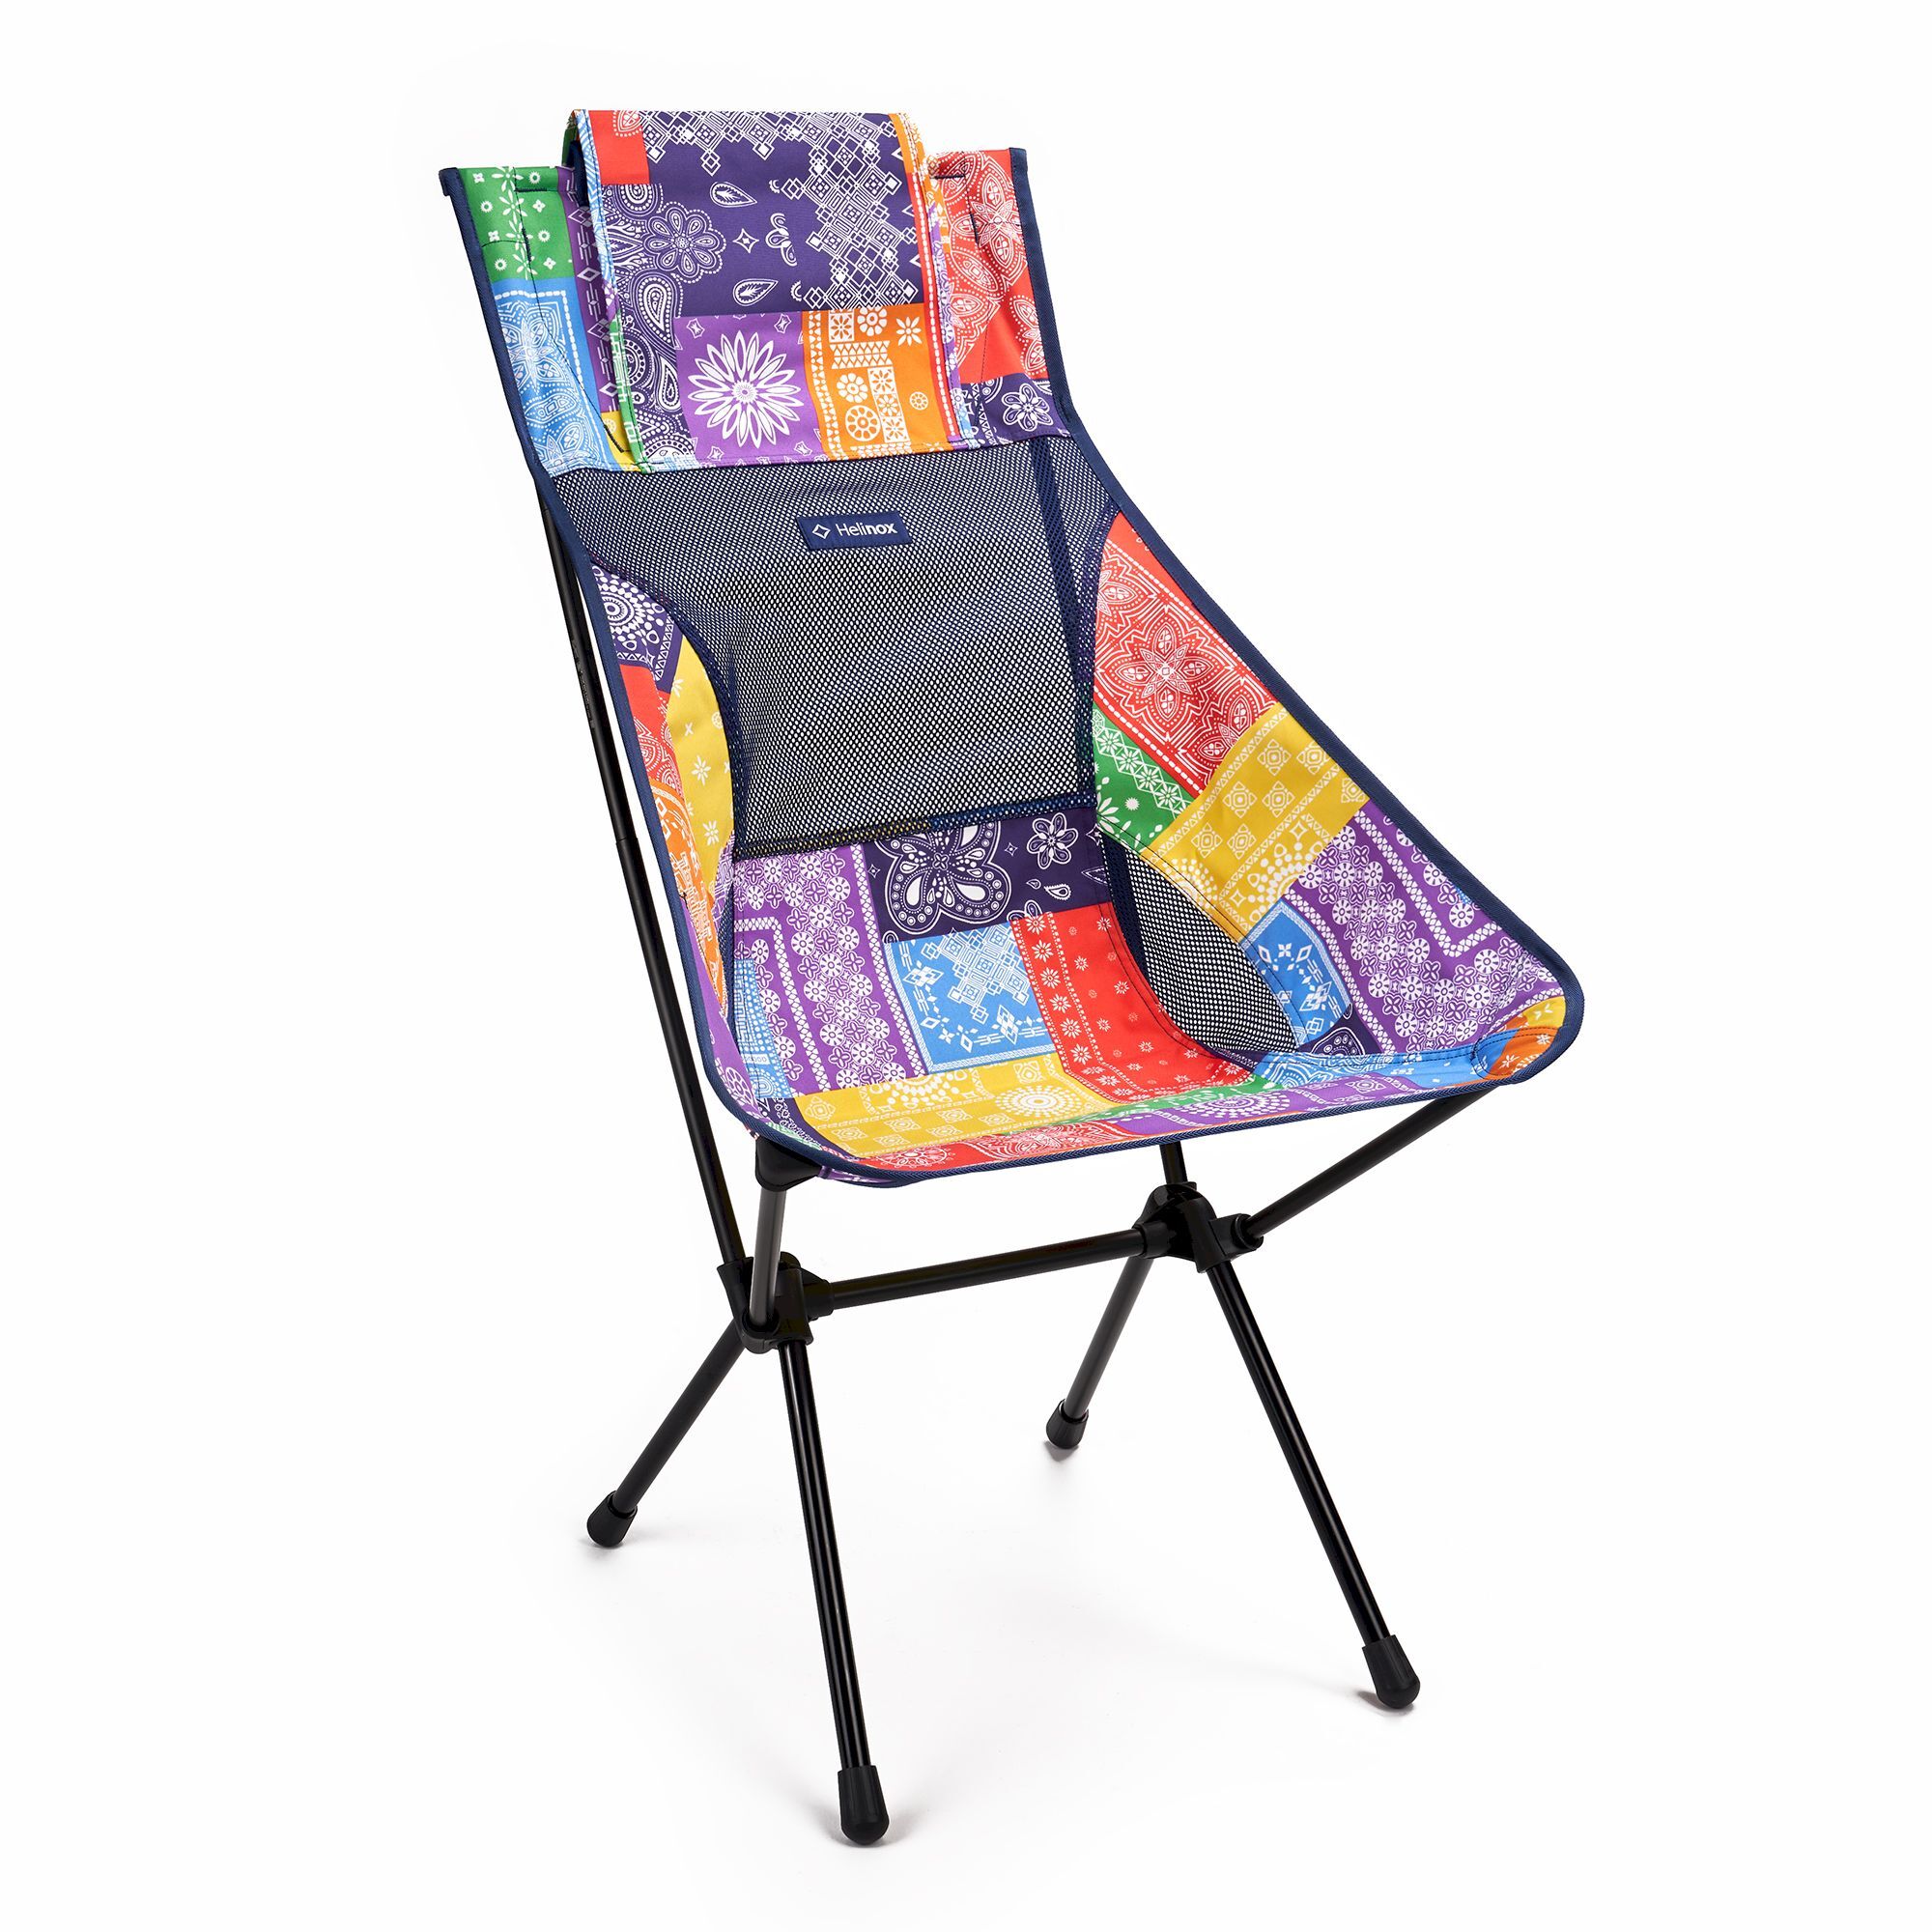 Helinox Sunset Chair - Camping chair